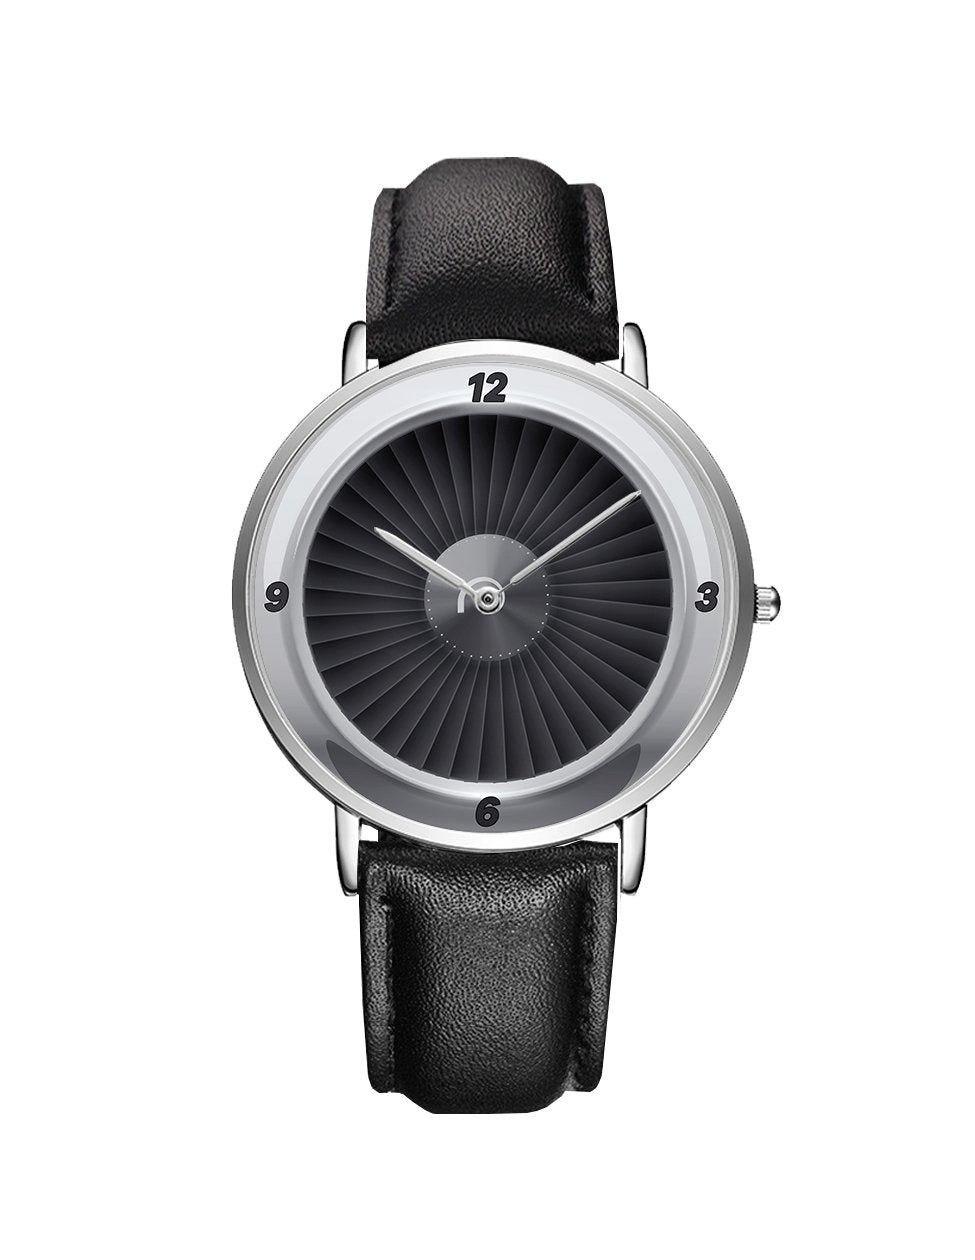 Jet Engine Designed Leather Strap Watches Pilot Eyes Store Silver & Black Leather Strap 